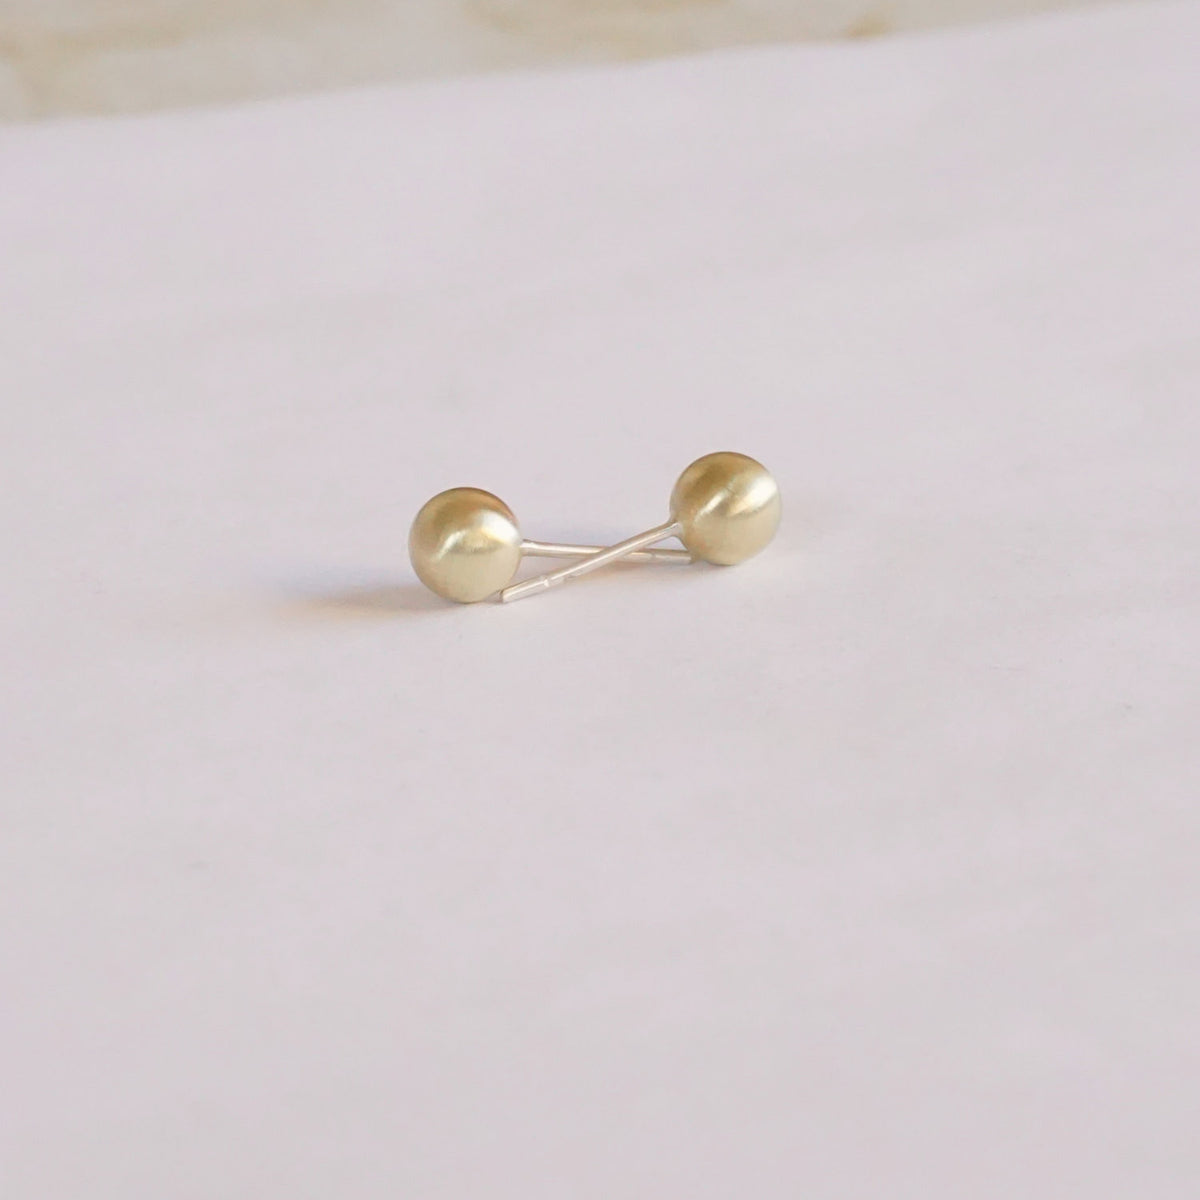 Well Designed, Sophisticated, Hand-Crafted Solid Brass Ball Stud Earrings - 0201 - Virginia Wynne Designs